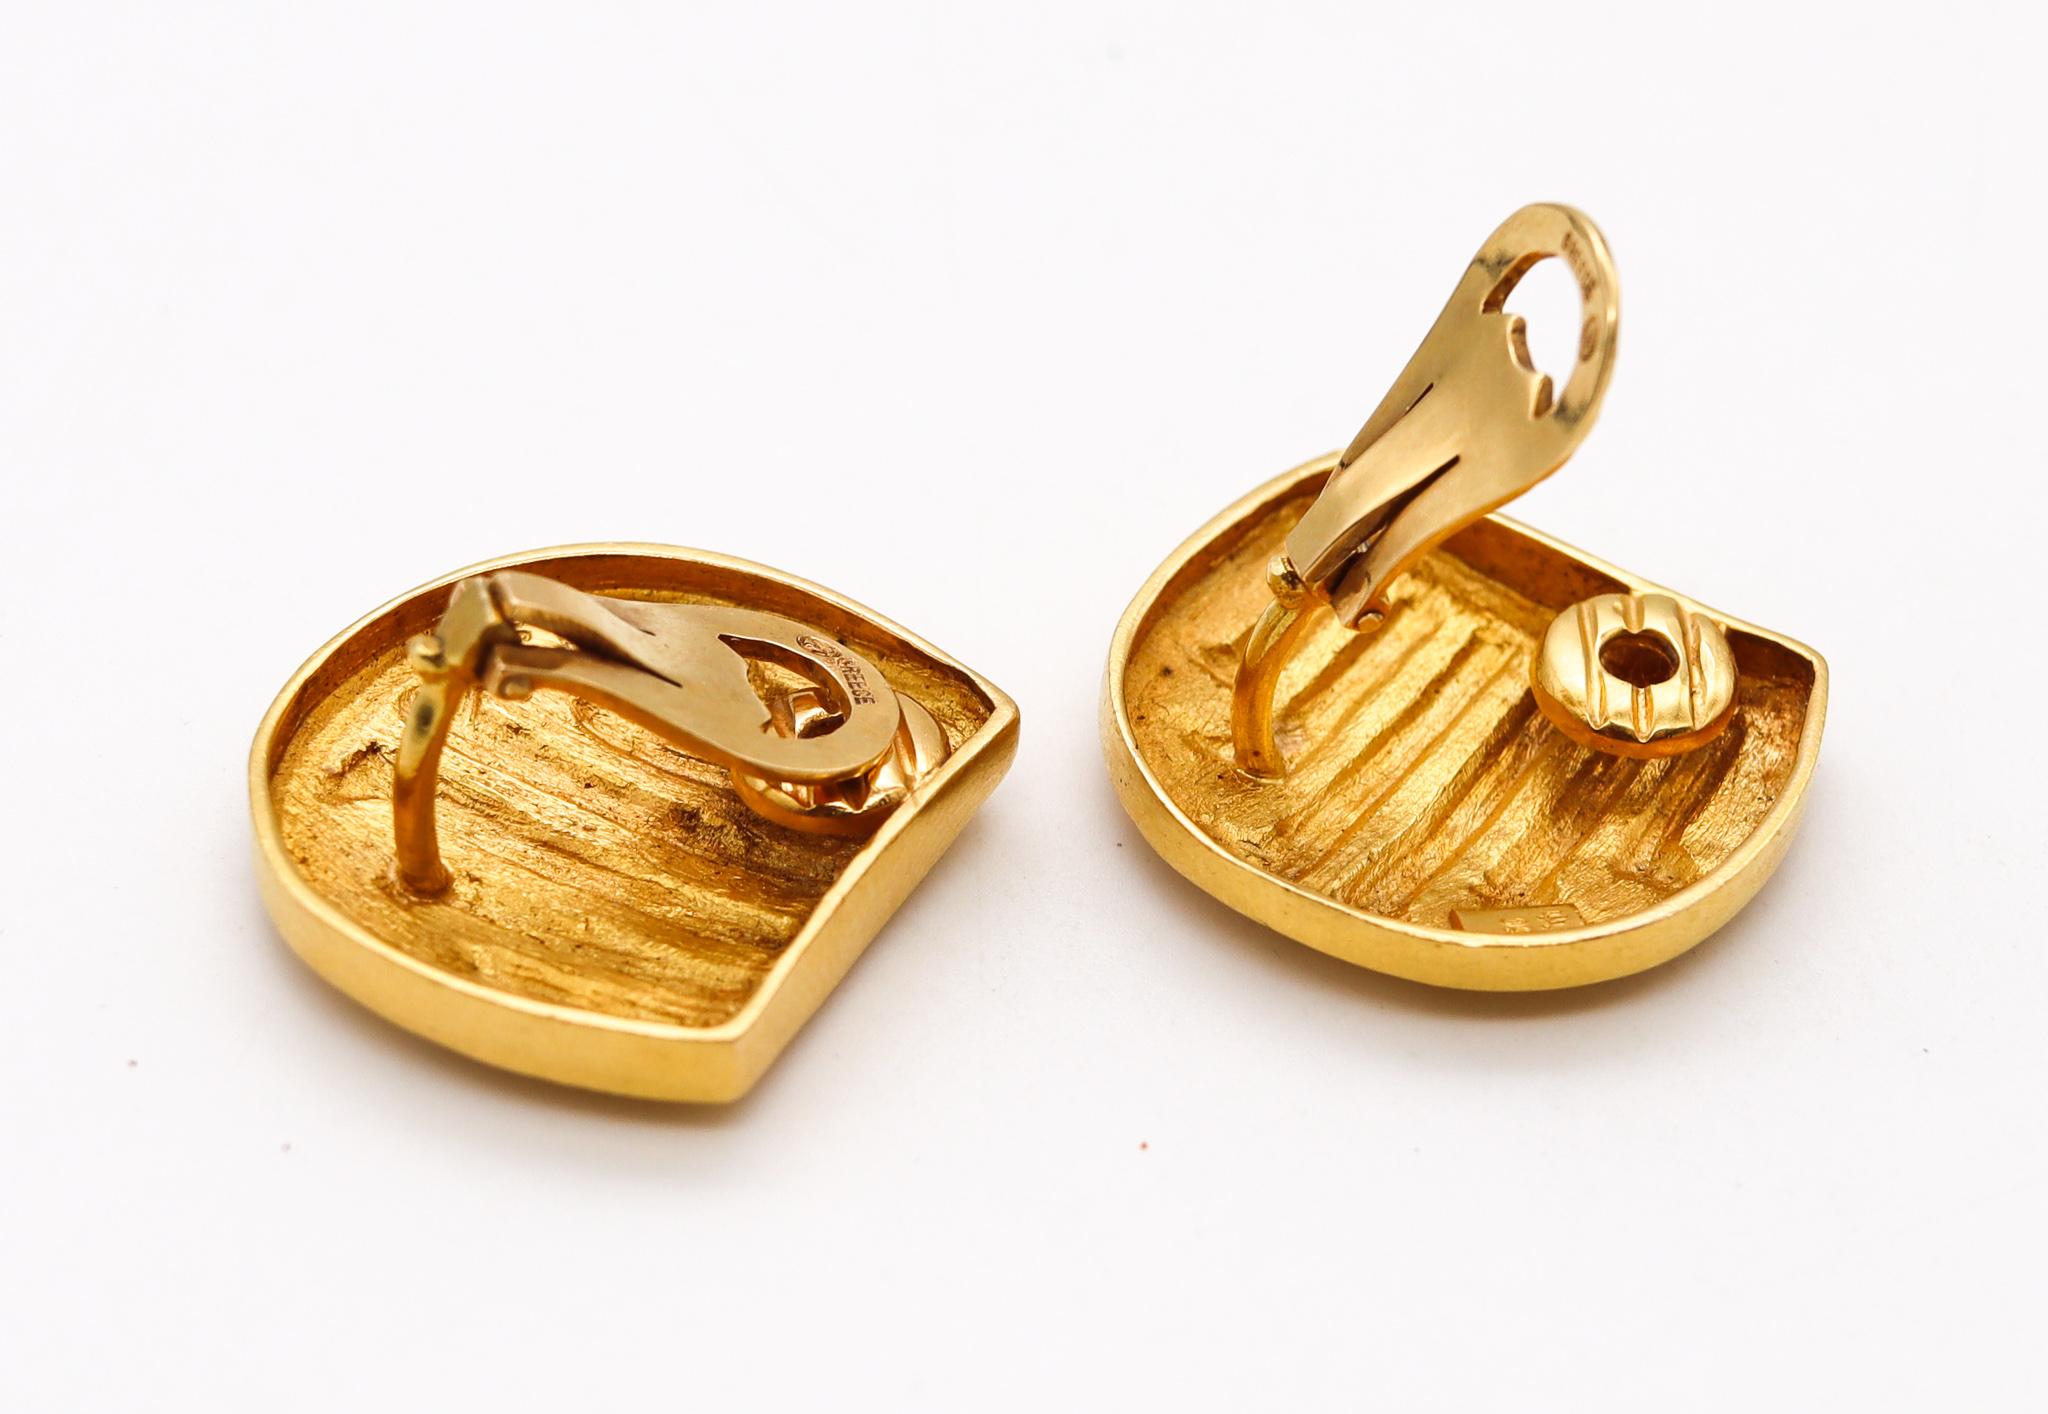 A pair of Earrings designed by Ilias Lalaounis.

Beautiful and rare geometric pieces, created in Greece by the jewelry house of Lalaounis, back in the 1970's. These gorgeous clip earrings has been carefully crafted in solid yellow gold of 18 karats,